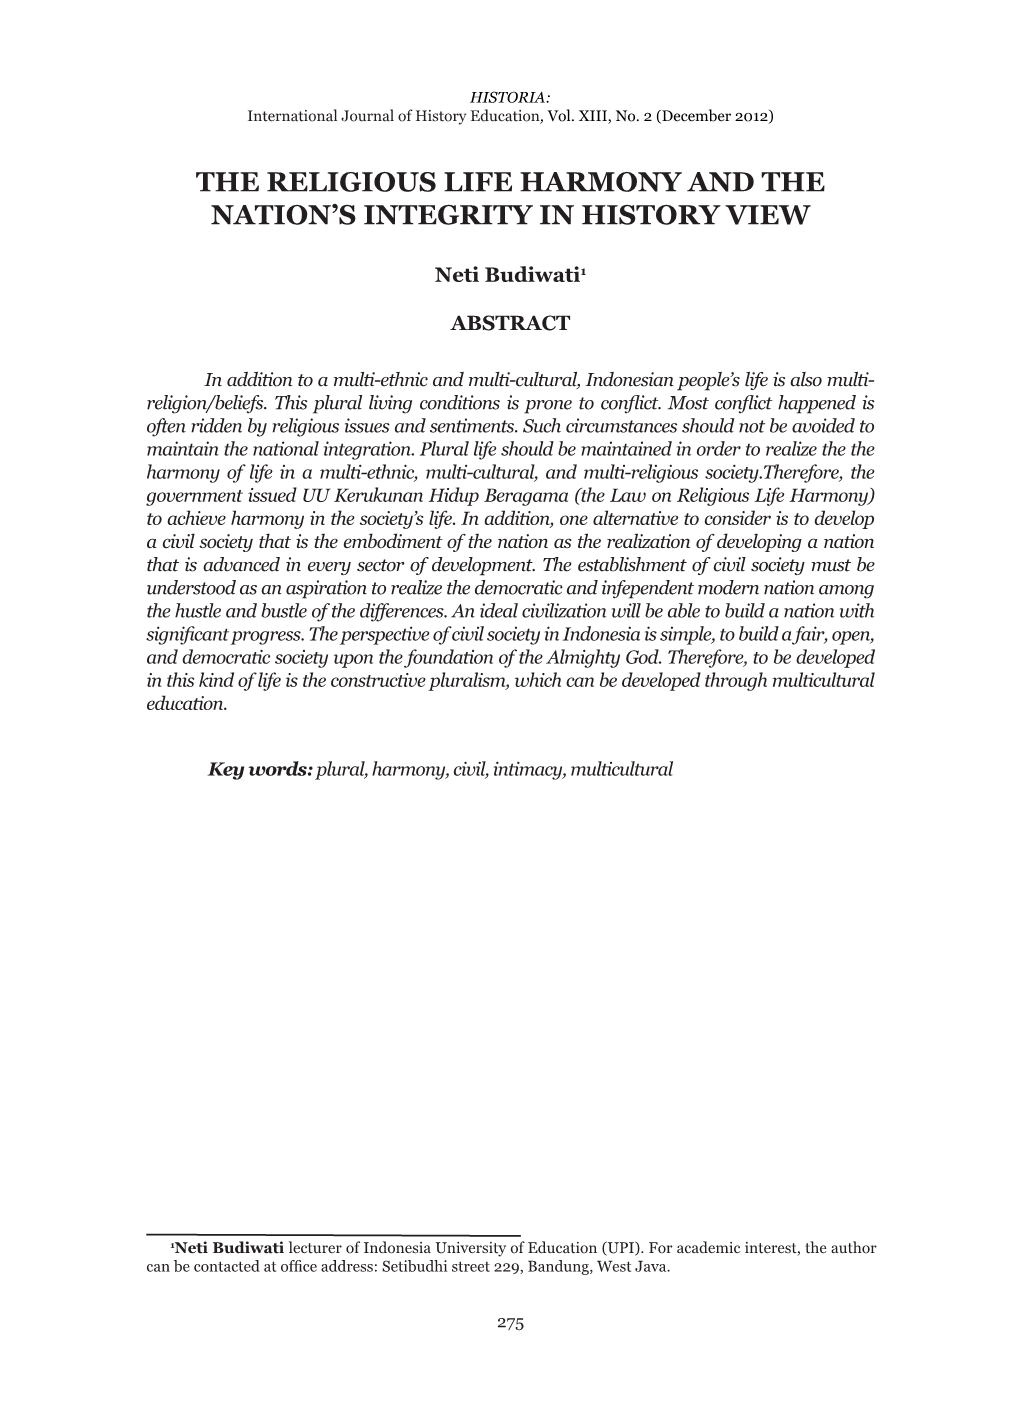 The Religious Life Harmony and the Nation's Integrity in History View